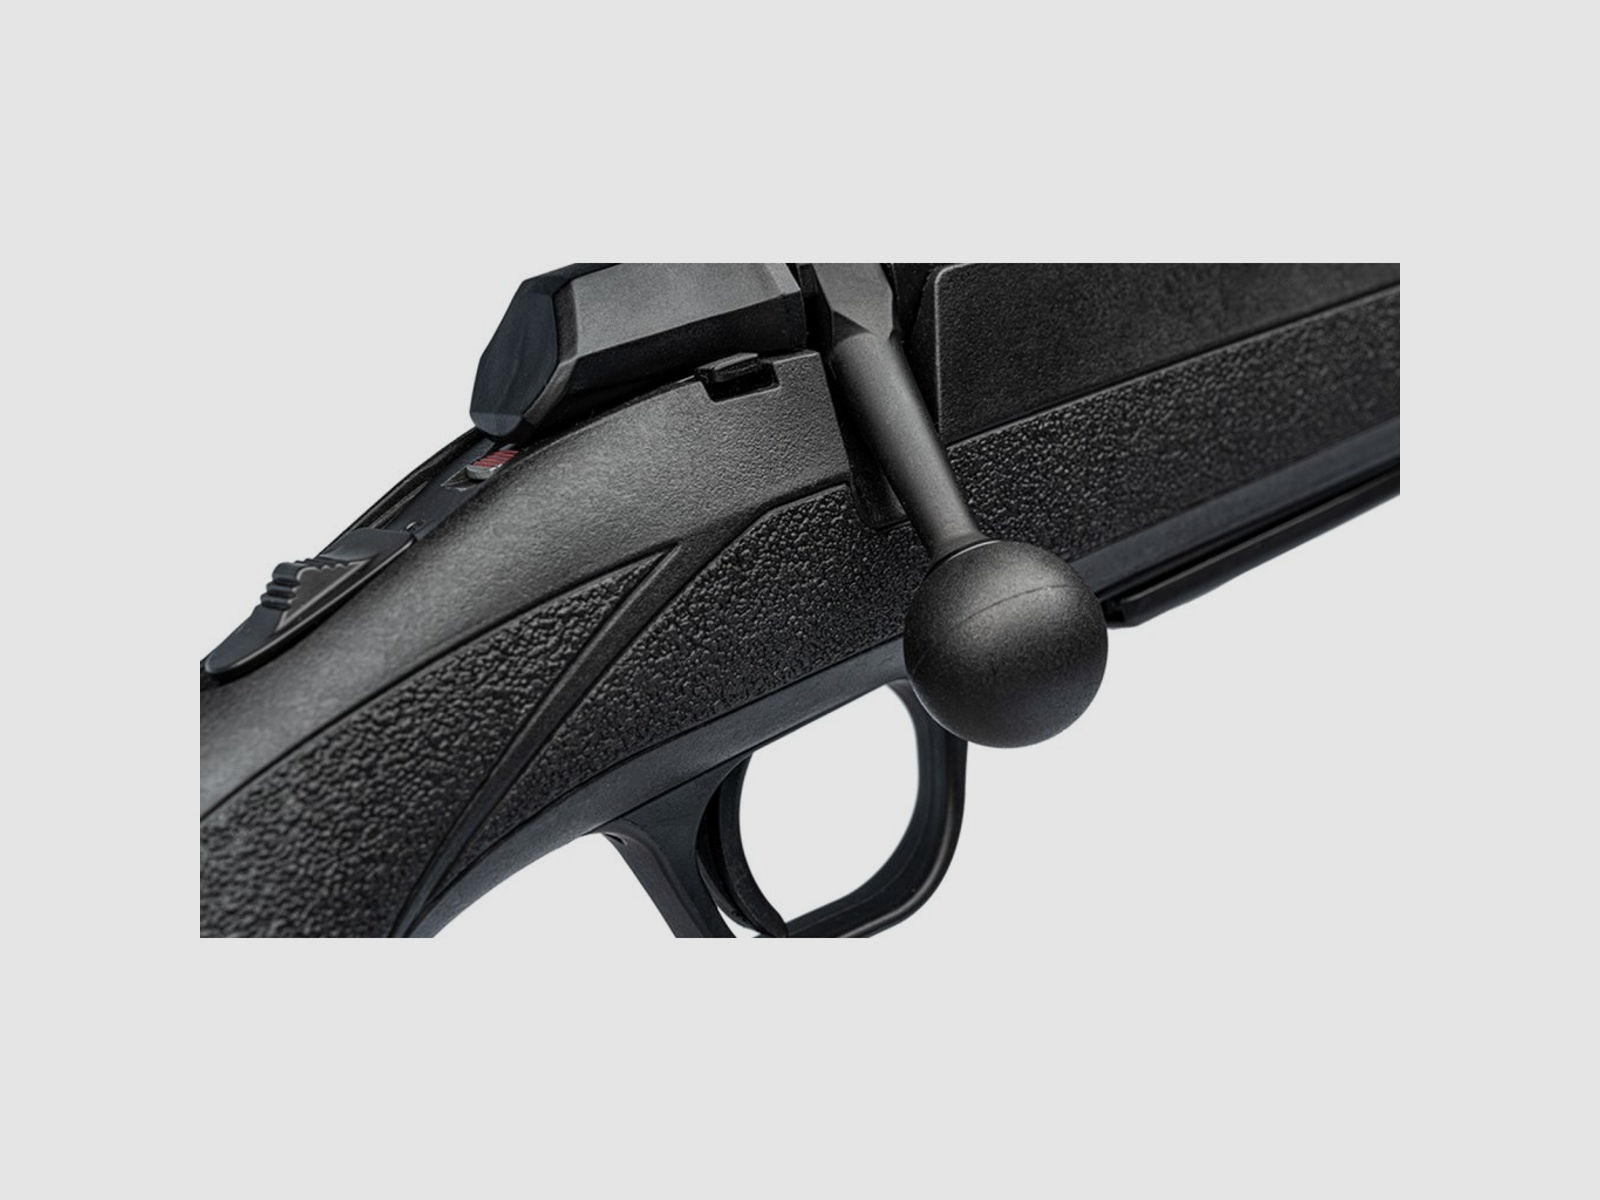 BROWNING A-Bolt 3+ Composite Threaded